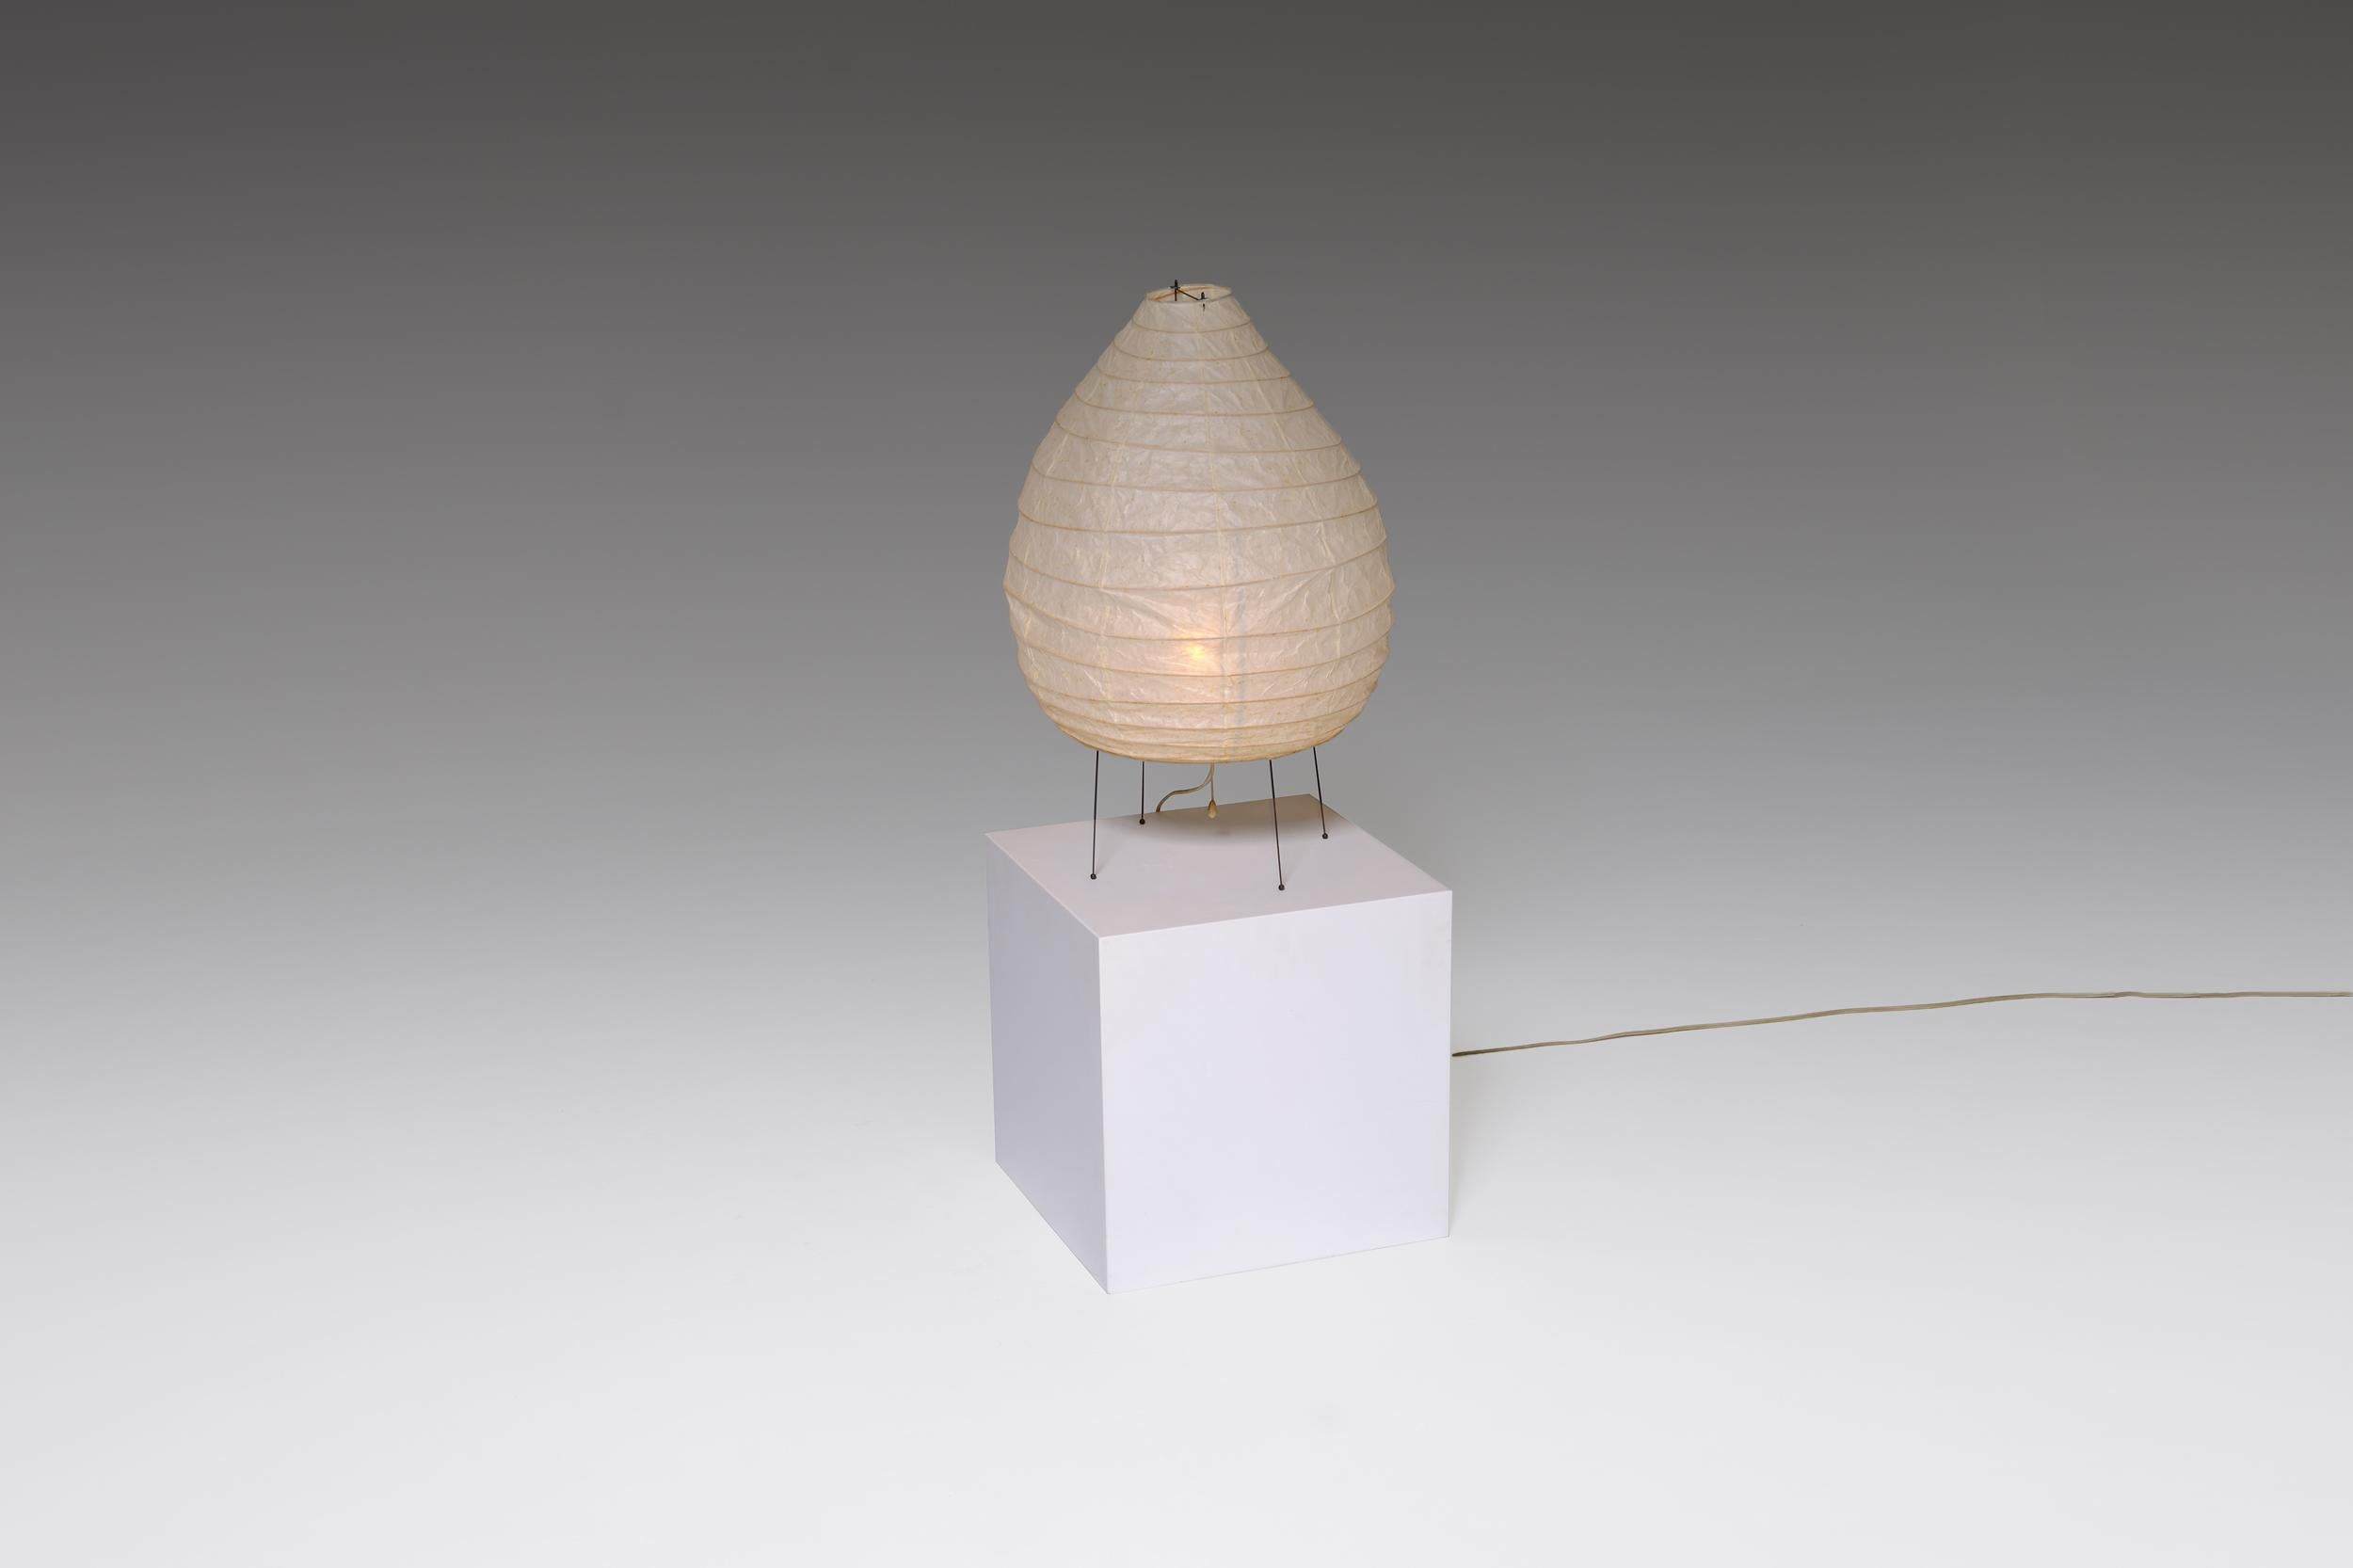 Large table lamp mod. 22N by Isamu Noguchi for Akari, Japan, circa 1950s. Early edition, for those who keep it real! Reminiscent of traditional Japanese lanterns, made from rice paper, bamboo and metal. Takes one E27 bulb. In original condition with